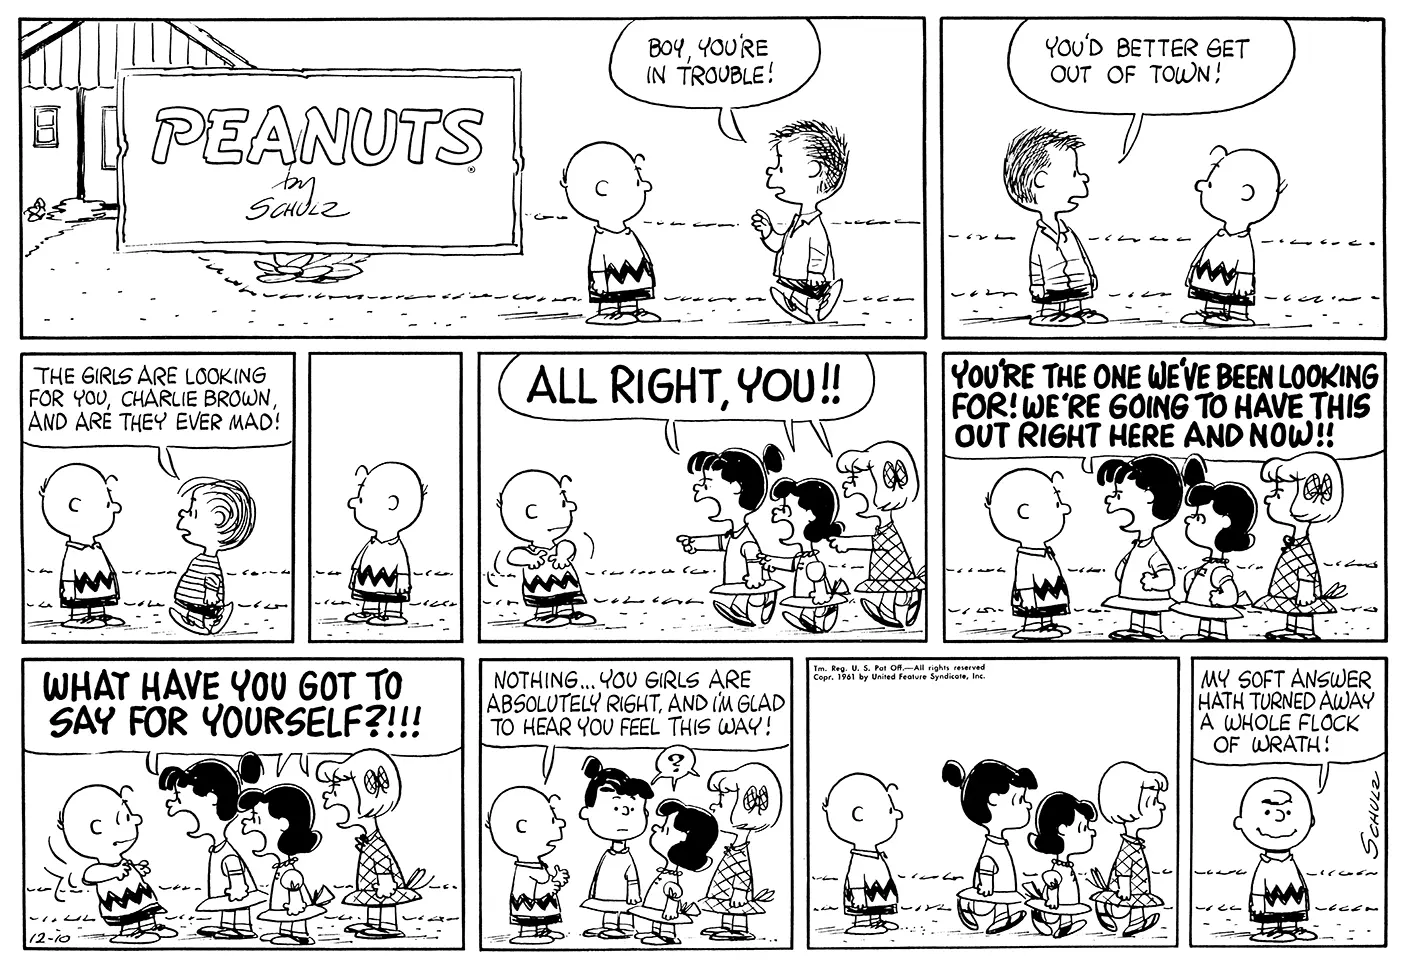 Lucy, Patty, and Violet scold Charlie Brown in a comic of Charles Schulz's Peanuts strip.